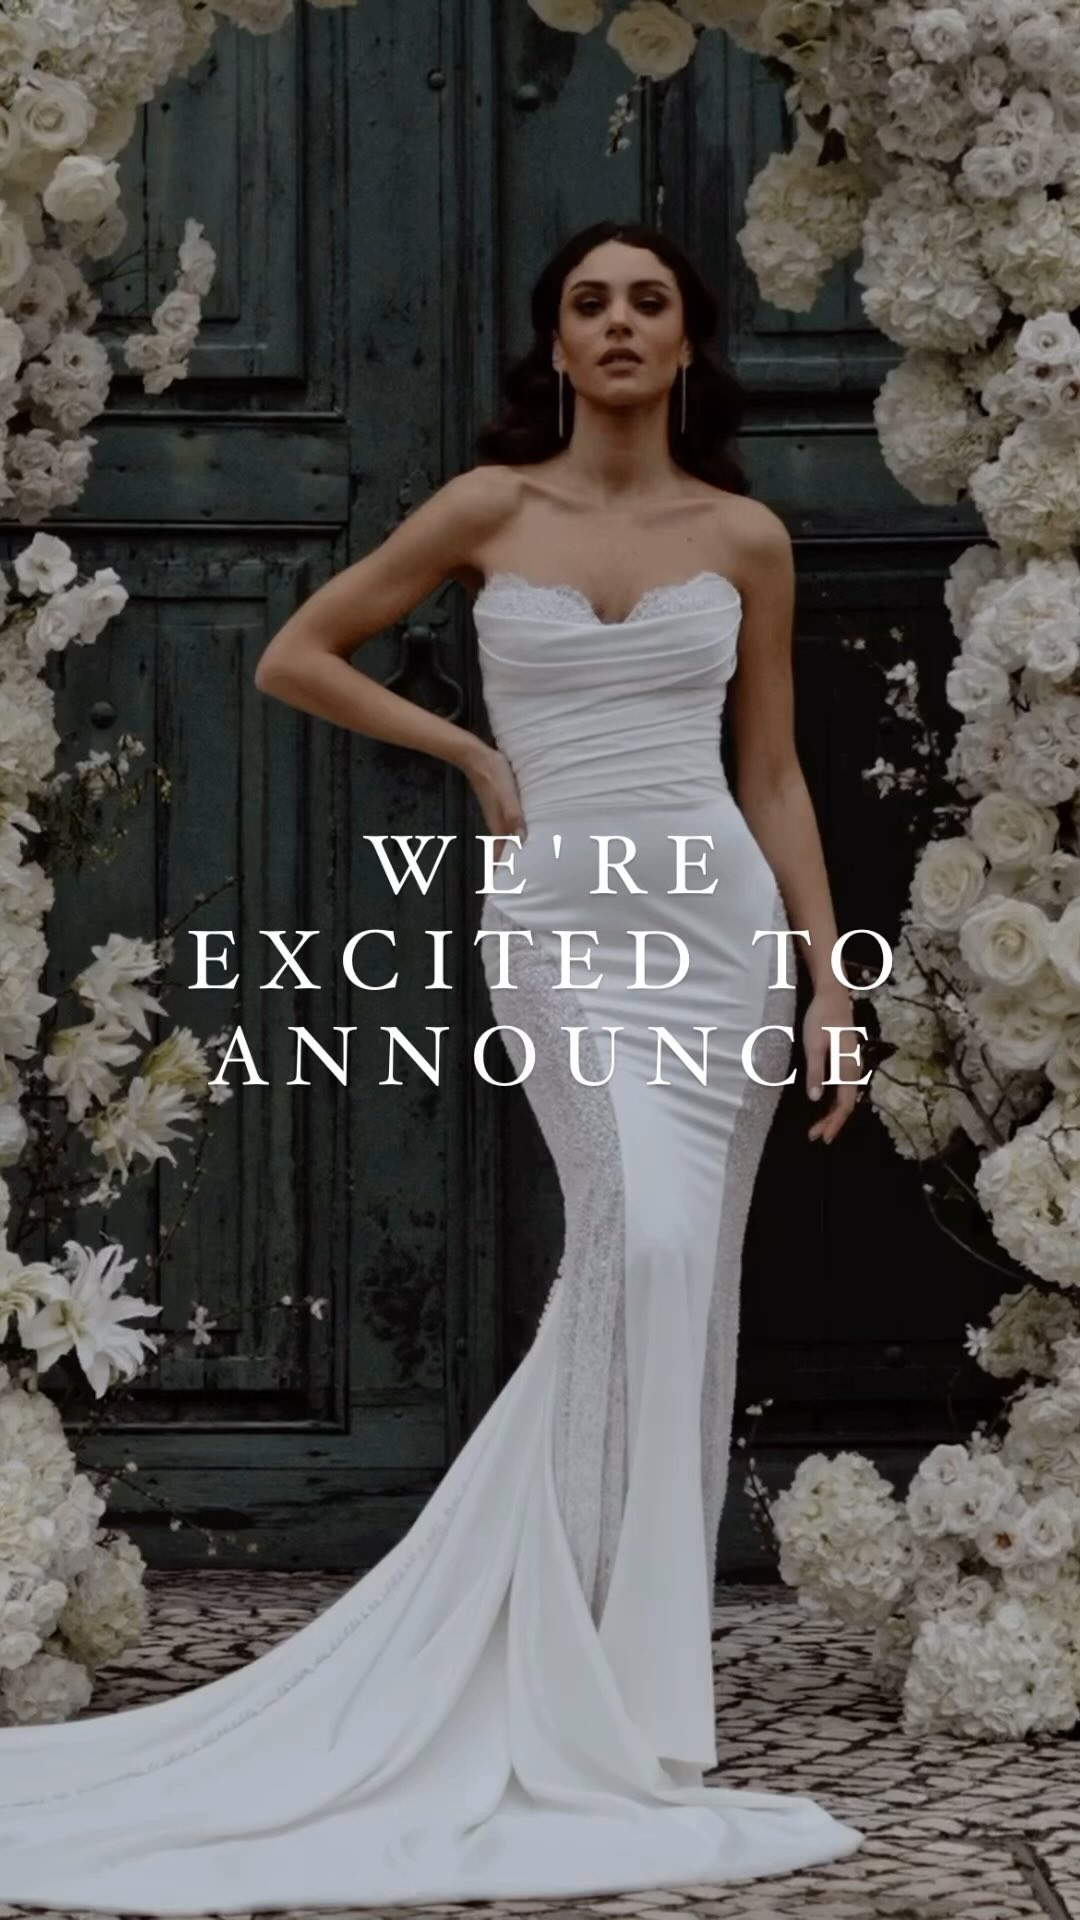 E X C I T I N G  N E W S :: you’re not gonna wanna miss this launch … We have partnered with the incredible @abellabride to bring you the hottest European inspired styles straight from the catwalk to our showroom rails ◊ With styles already arriving at our townhouse ahead of our official label launch trunk show in late June we just had to jump on & let you know how excited we are about these styles ◊ A little more on our new luxe label … Boldly curated with European Bridal in mind, the Abella bridal collection breathes elegance. With maximal trains & glistening opulence, Abella is inherently beautiful :: encapsulating the essence of understated luxury & unparalleled beauty ◊ Head to our highlights go see the styles joining our bridal showroom ◊ #youarepreciousbridal #bridalnews #bridaldesigner #weddingdressinspo #abellabridal #designerweddingdress #newcastleupontyne #newtonhall #lepetitchateau #haltongrove #charltonhall #lartingtonhall #weddingdressshop #bridalboutique